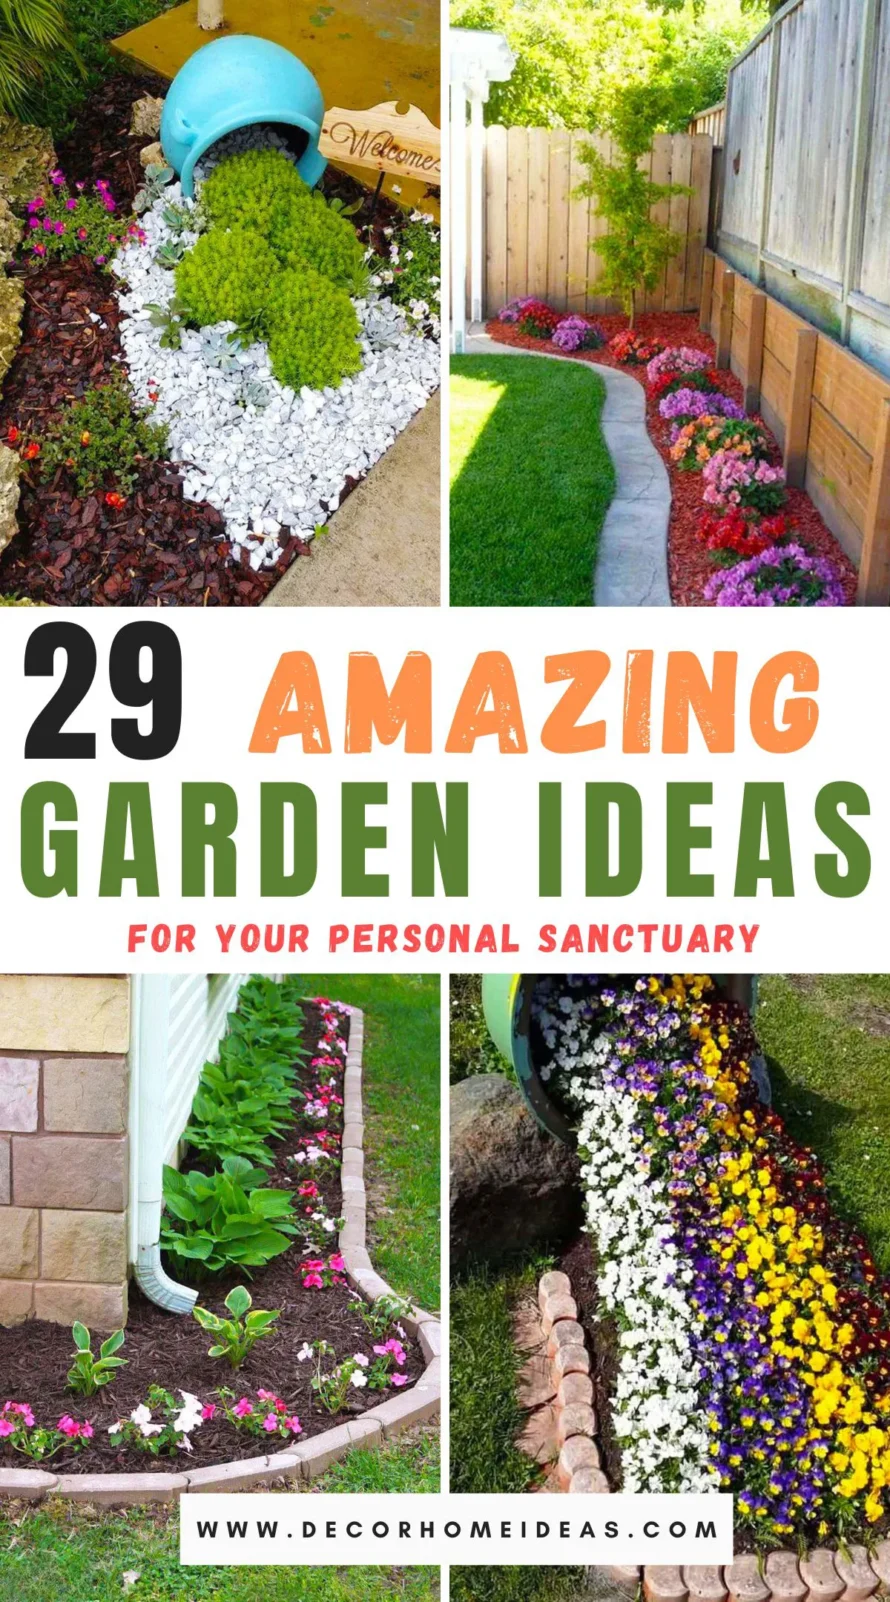 Explore 29 eye-catching garden projects to transform your outdoor space into a personal sanctuary. From tranquil water features to vibrant flower beds, these ideas are designed to inspire and refresh. See how simple additions can create a haven right in your backyard.